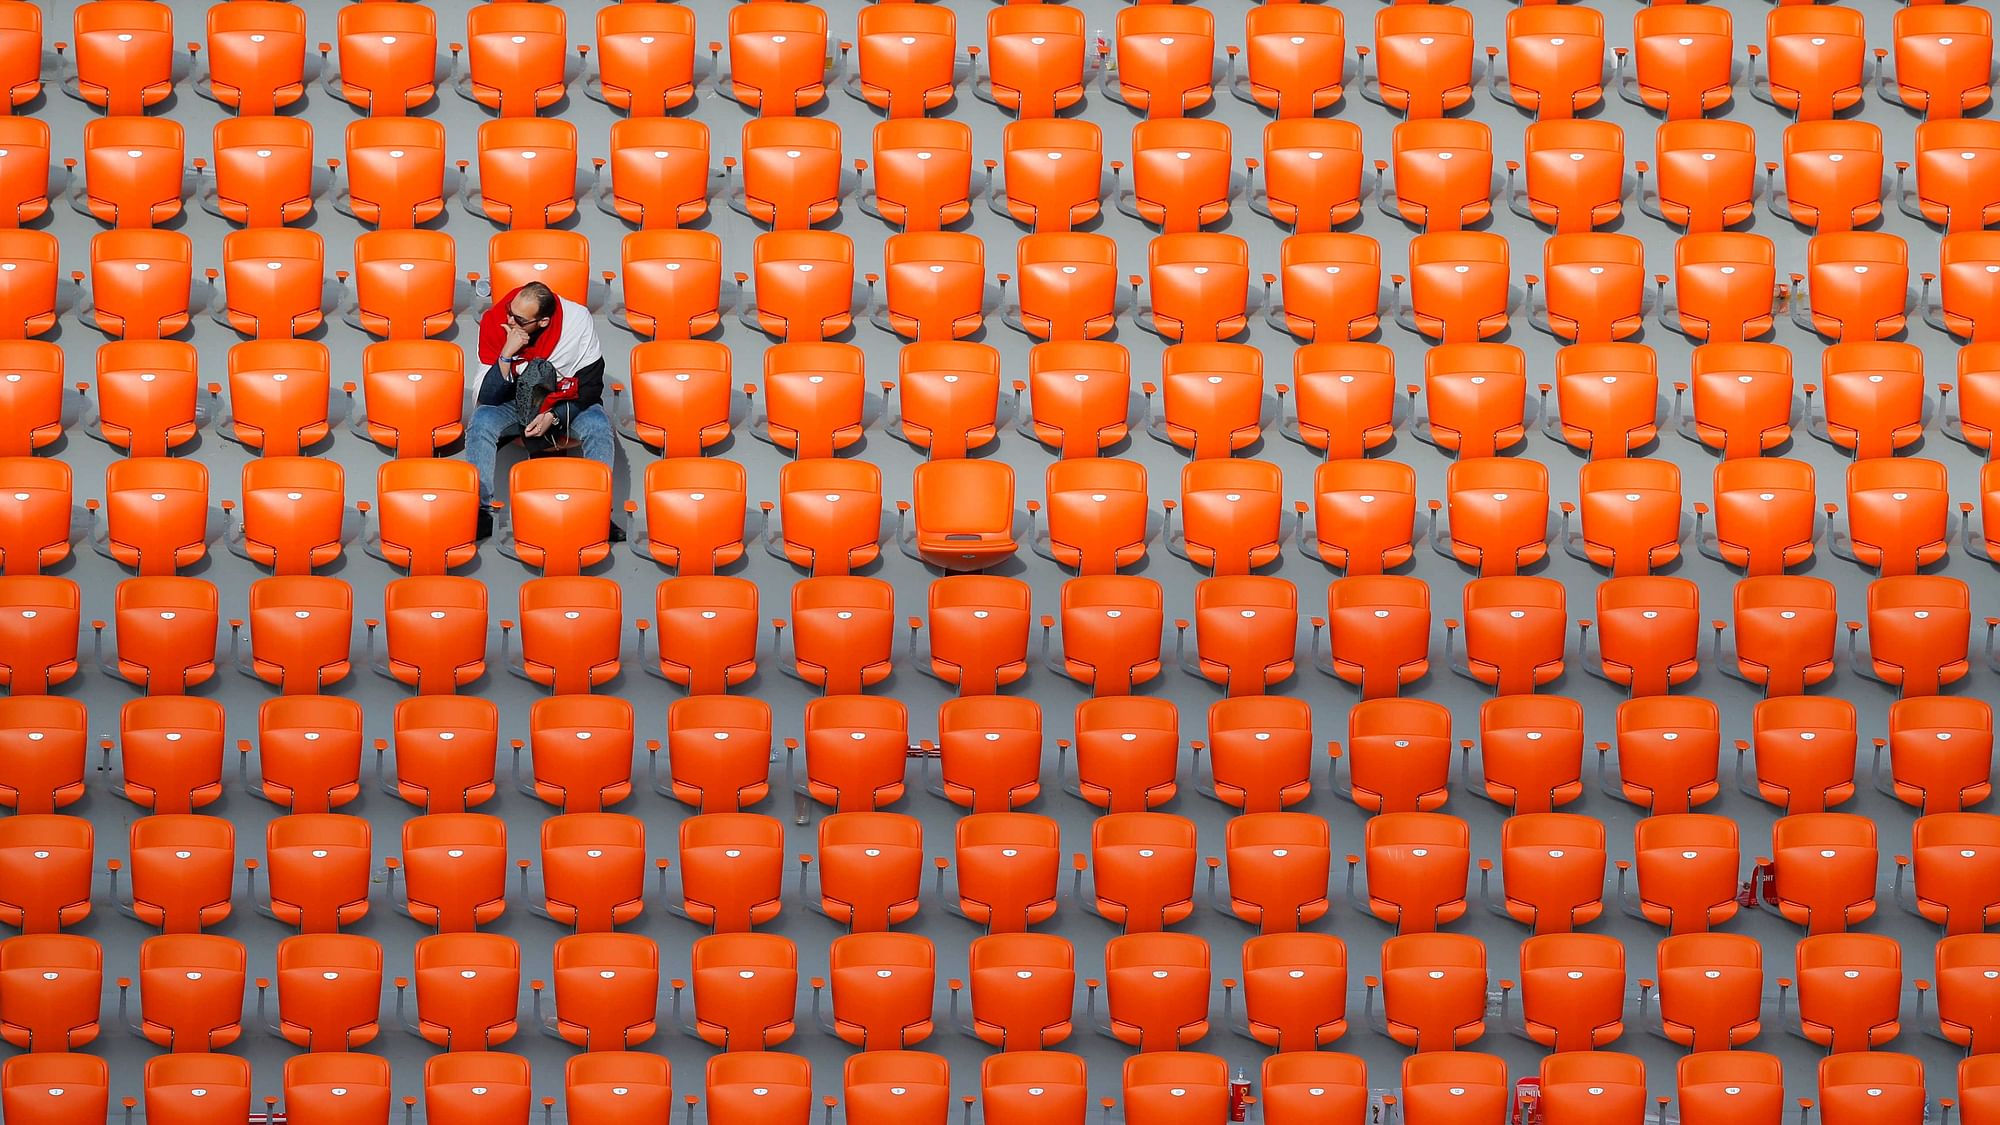 A fan in the stands at the end of the group A match between Egypt and Uruguay at the 2018 World Cup.